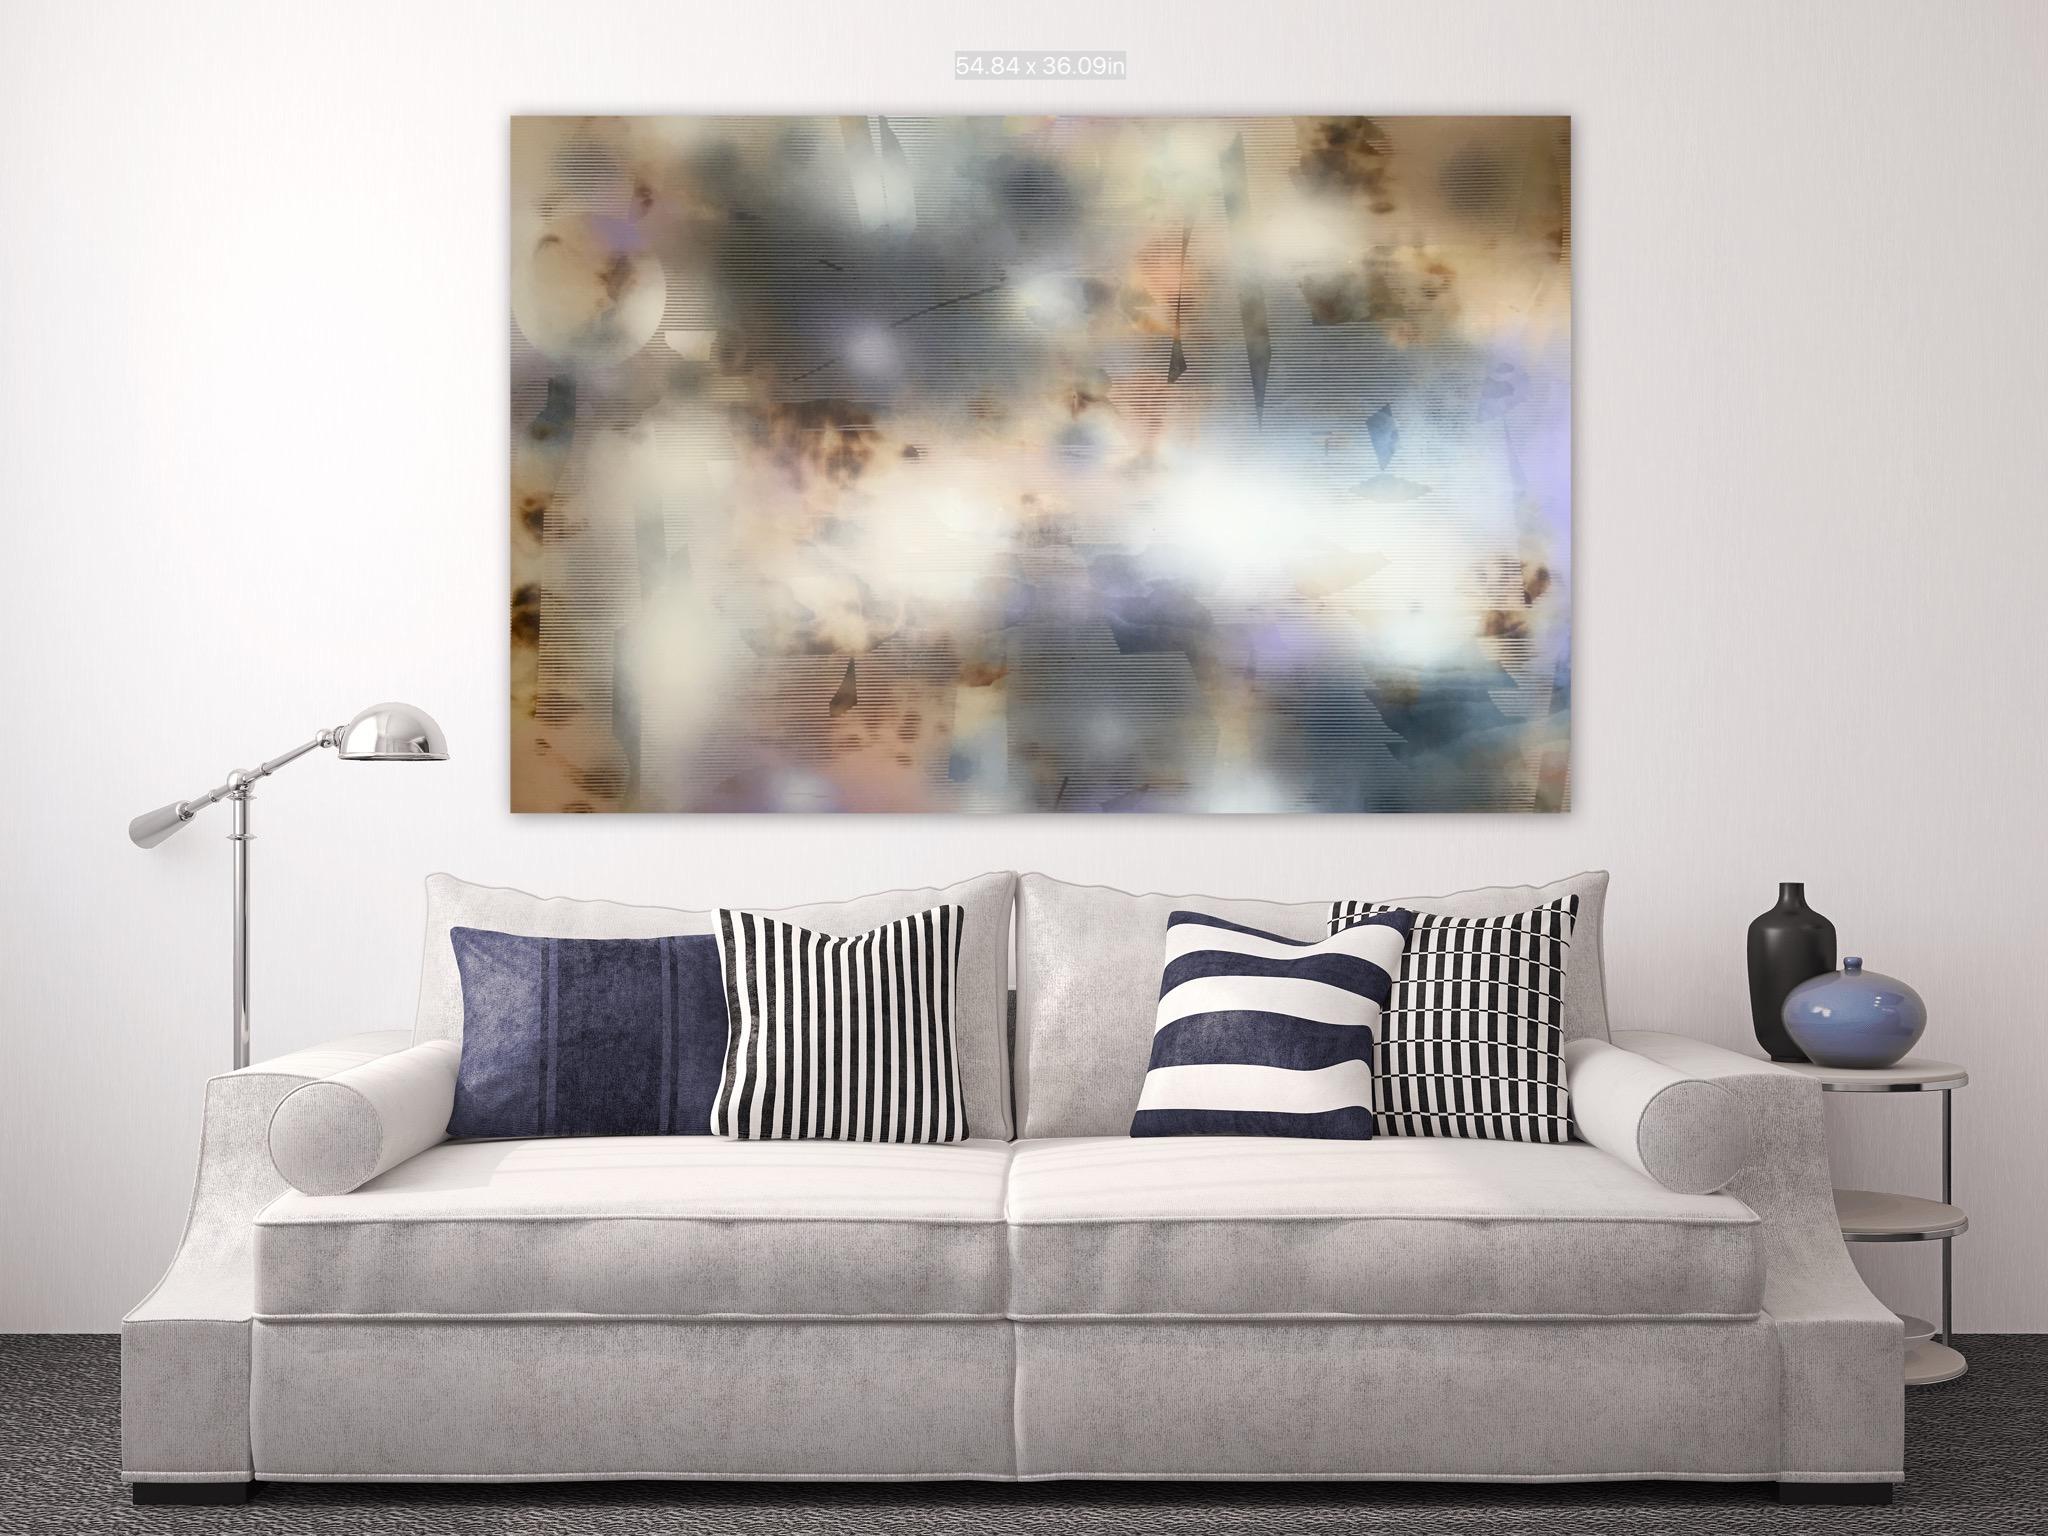 Turbulence 13 (grid painting abstract wood contemporary neutrals atmospheric art 3